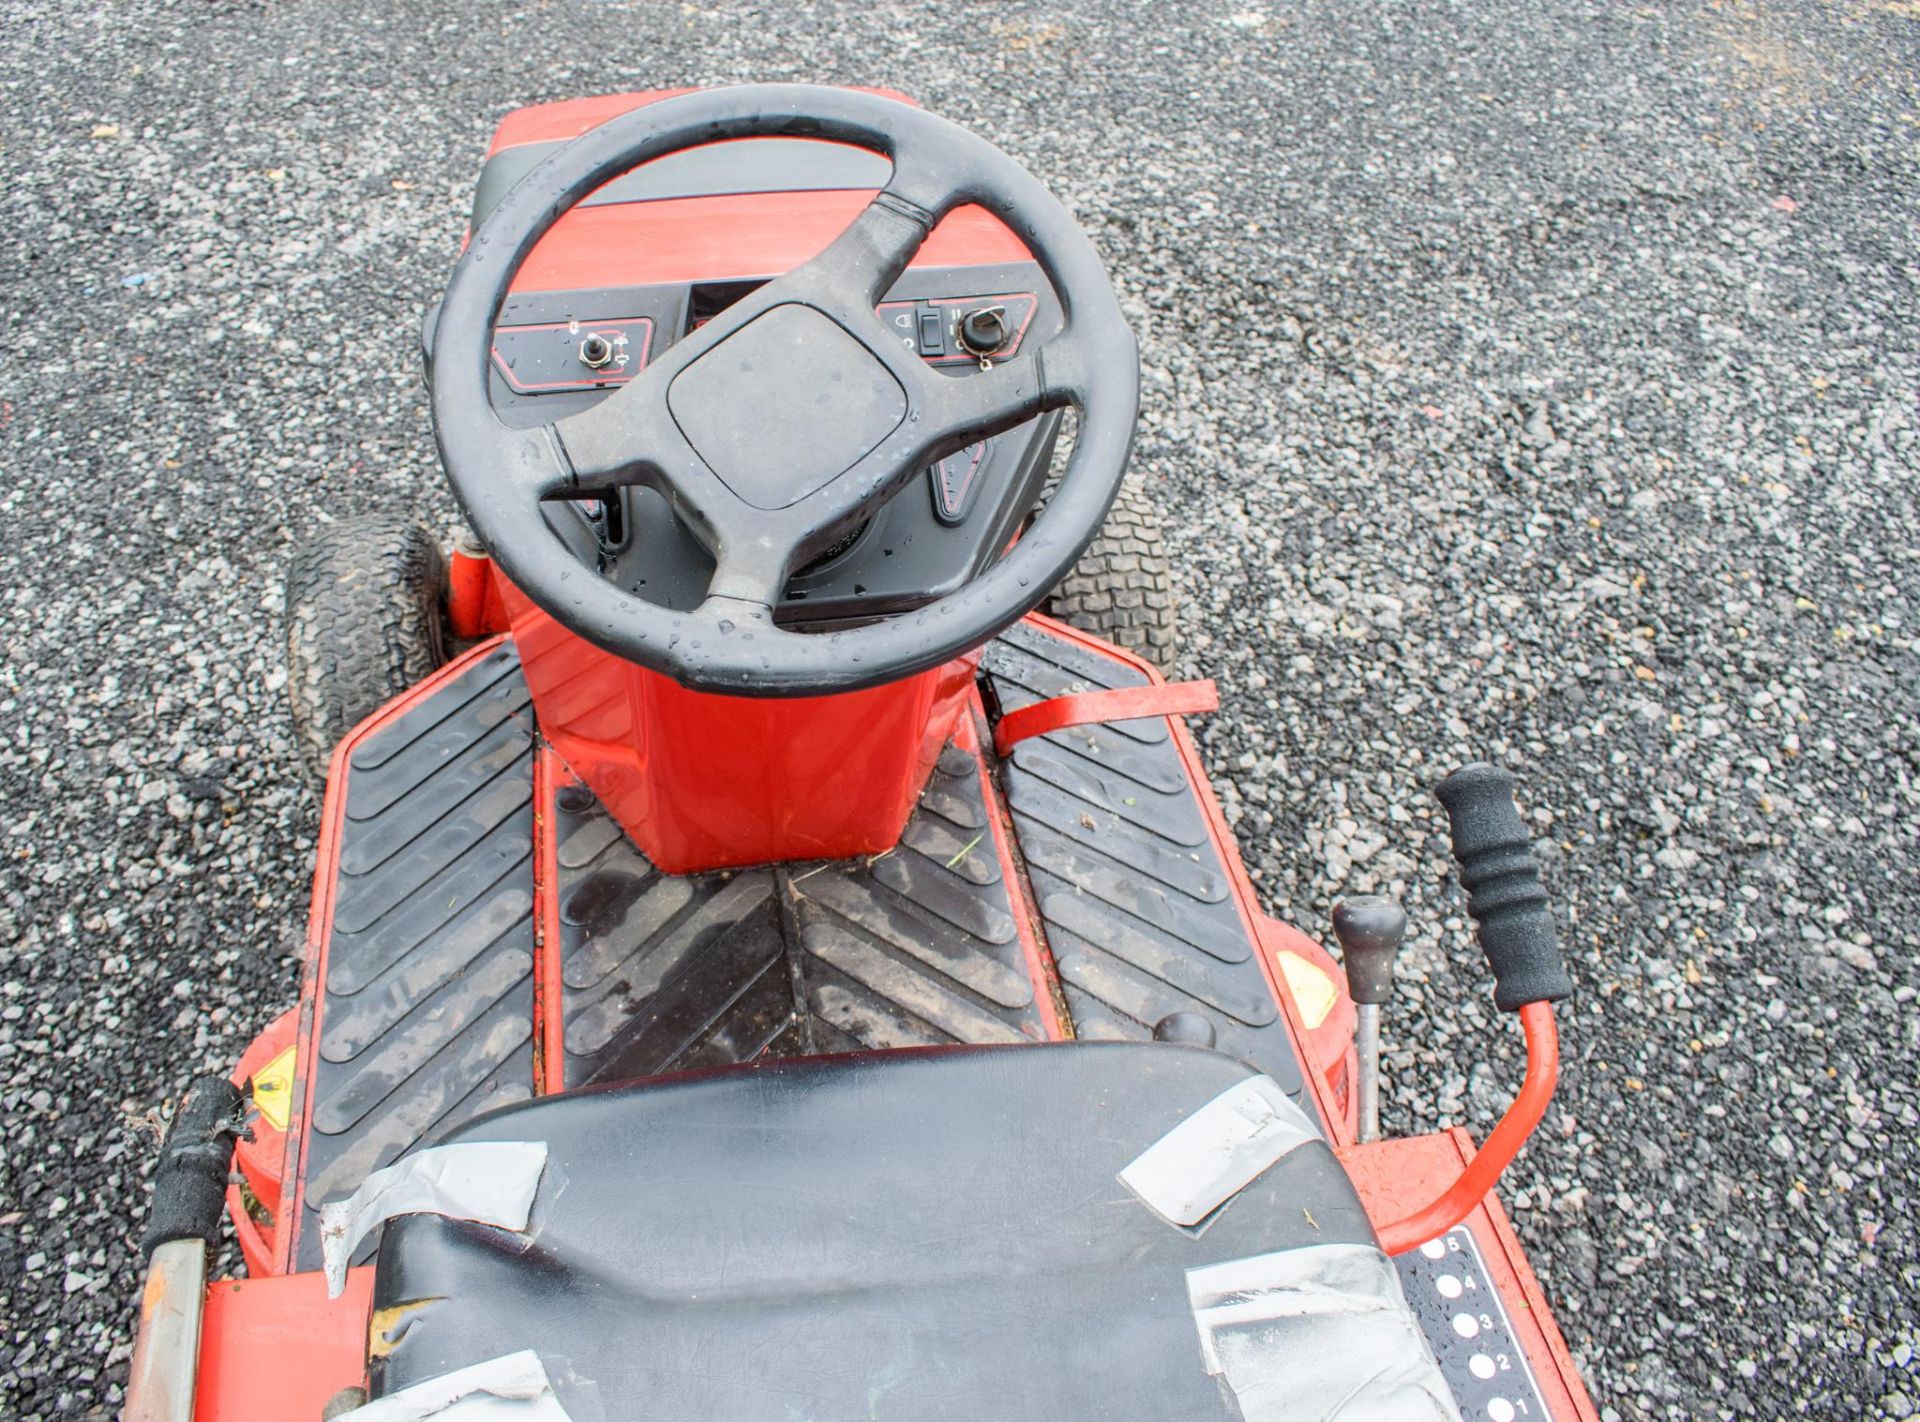 Countax C300M S speed manual sit on petrol driven mower ** 38 inch cutting width ** ** No VAT on - Image 11 of 11